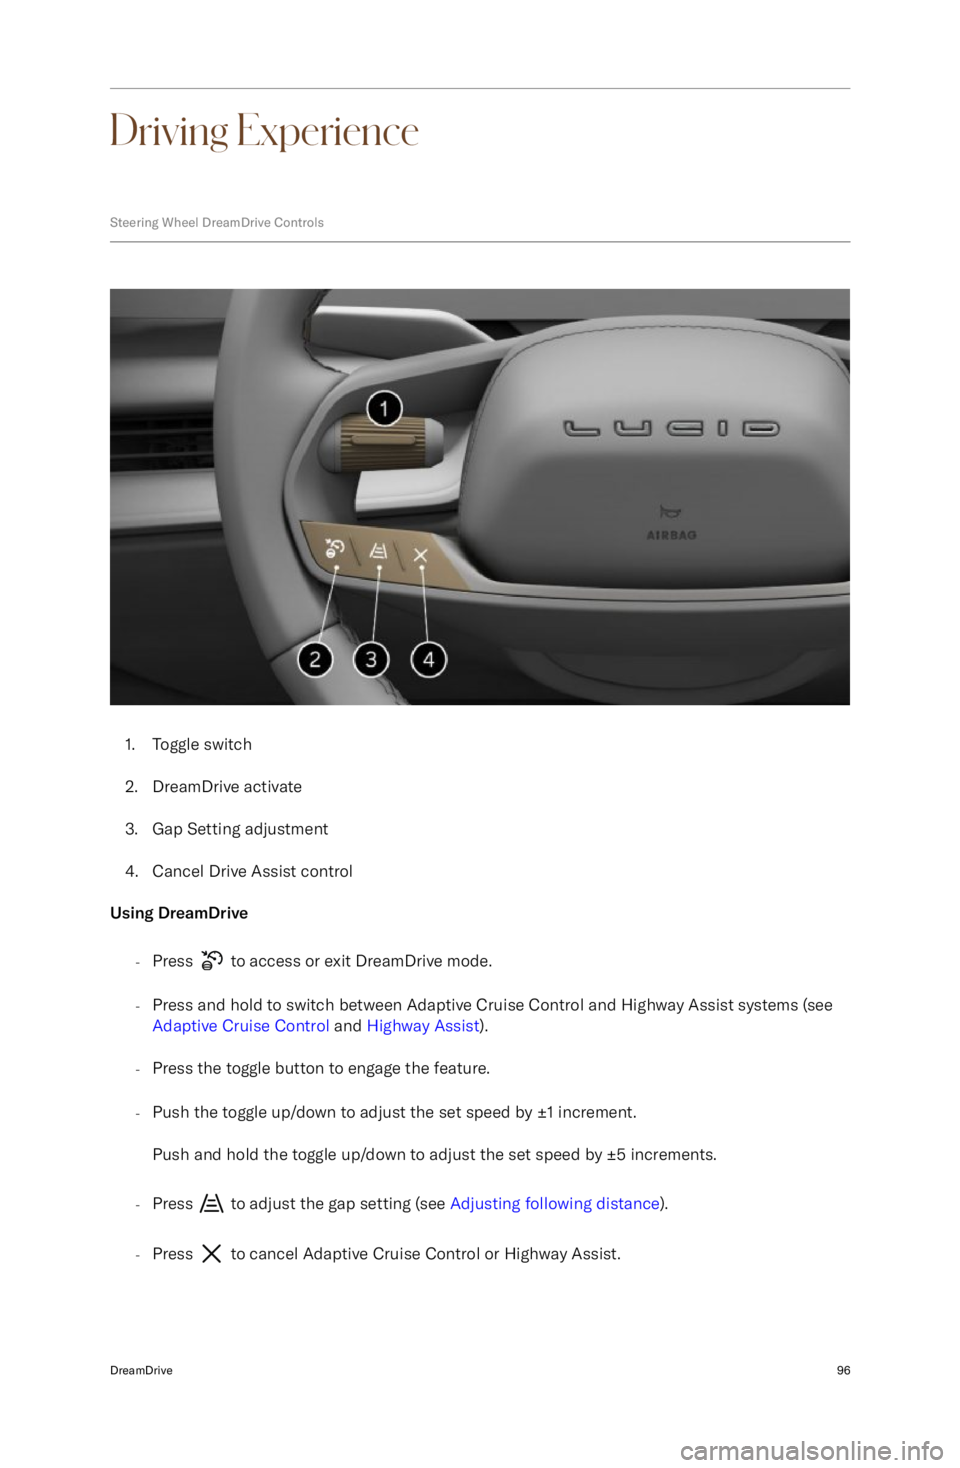 LUCID AIR 2022  Owners Manual Driving Experience
Steering Wheel DreamDrive Controls
1.Toggle  switch
2. DreamDrive activate
3. Gap Setting adjustment
4. Cancel Drive Assist control
Using DreamDrive
-Press 
 to access or exit Dream